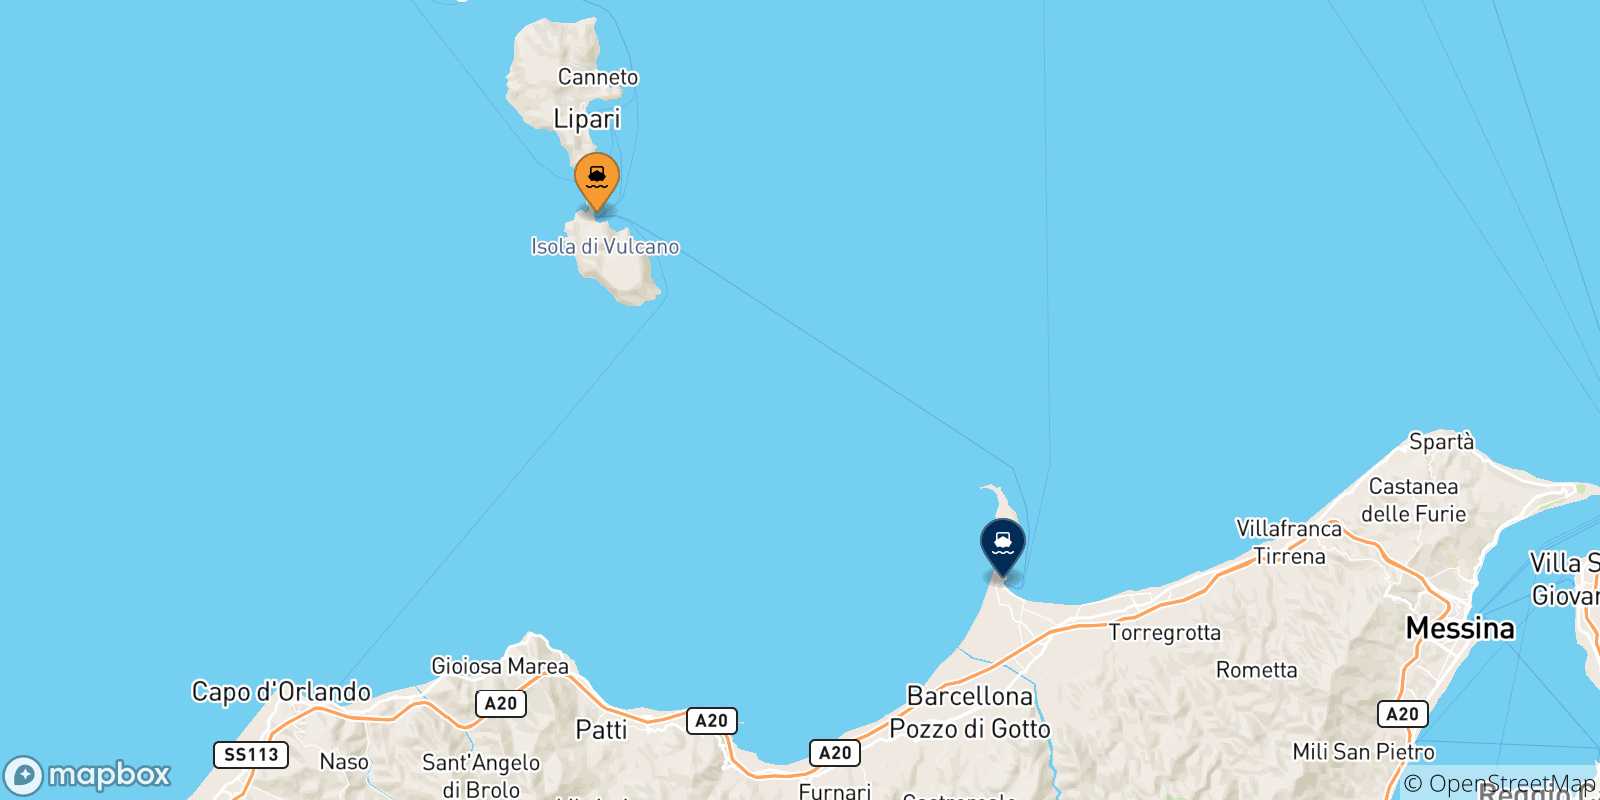 Map of the possible routes between Vulcano and Sicily